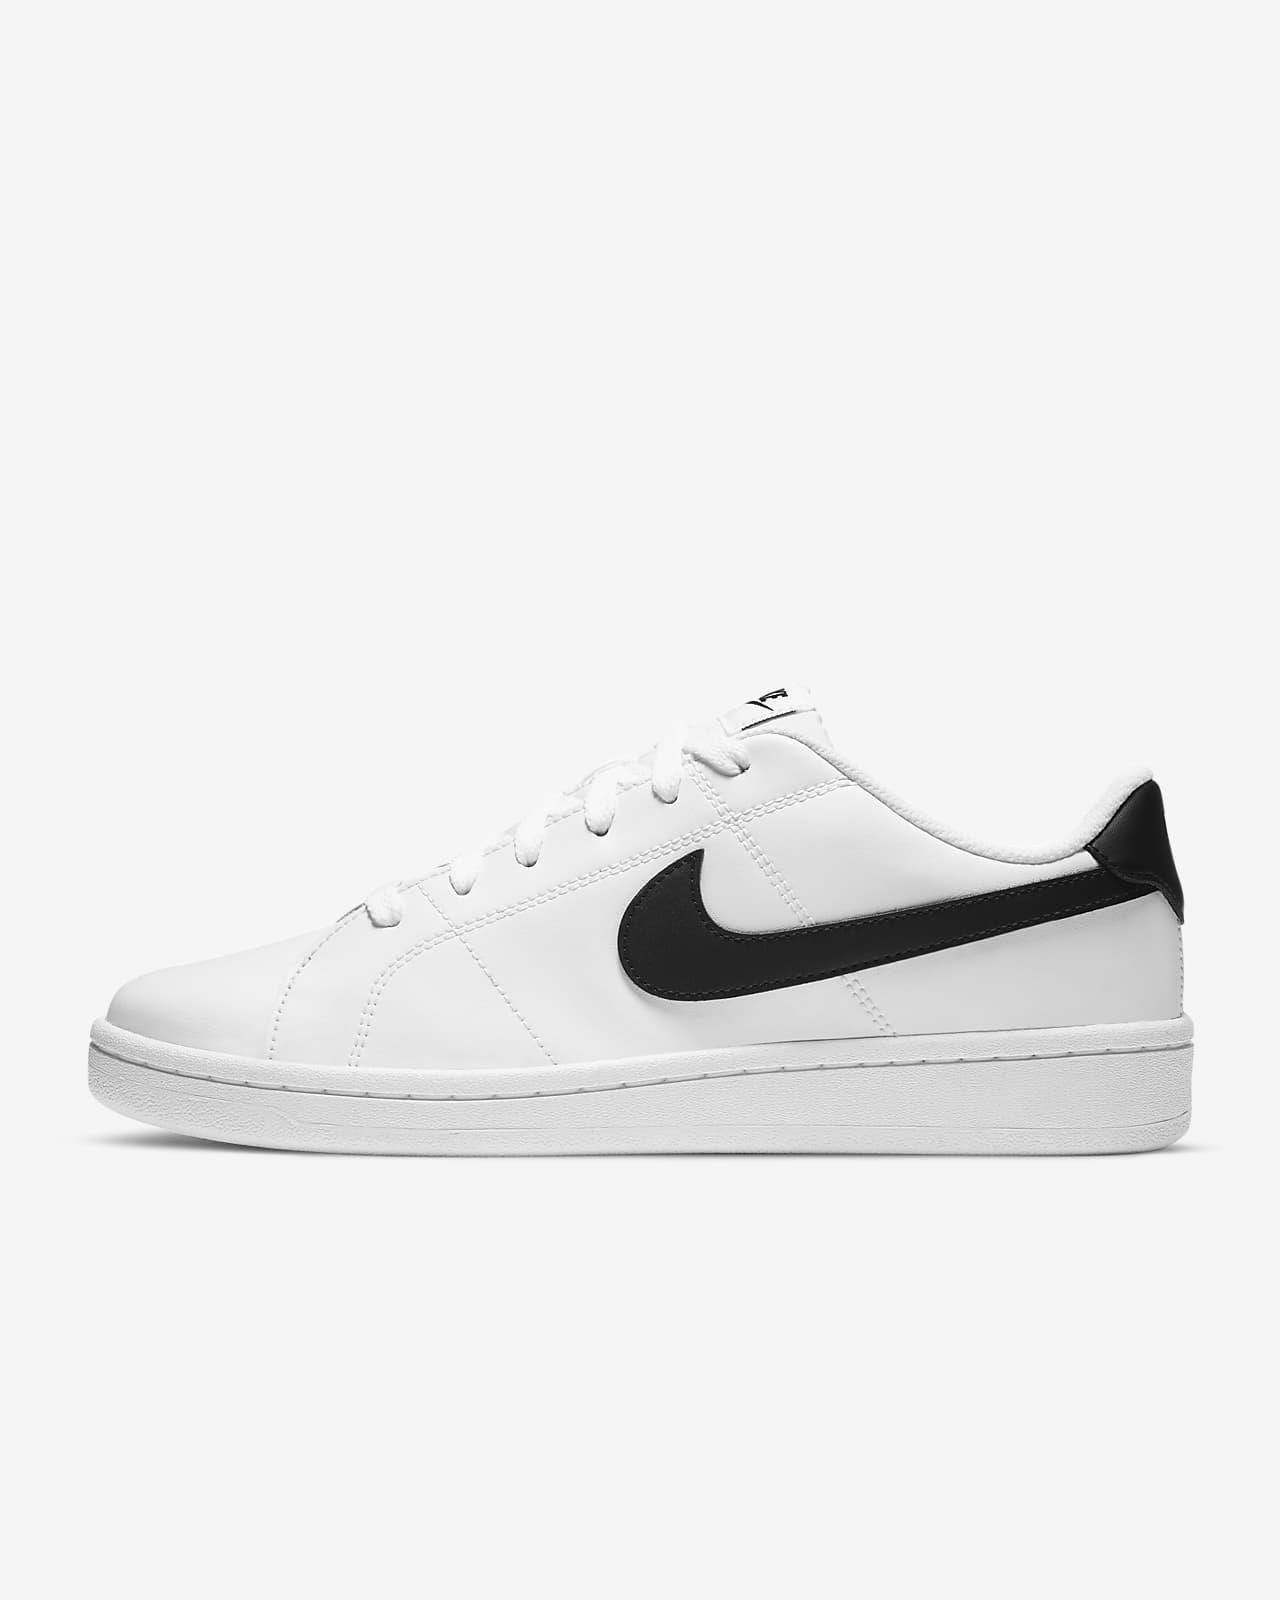 Nike Court Royale 2 低筒男鞋。Nike TW